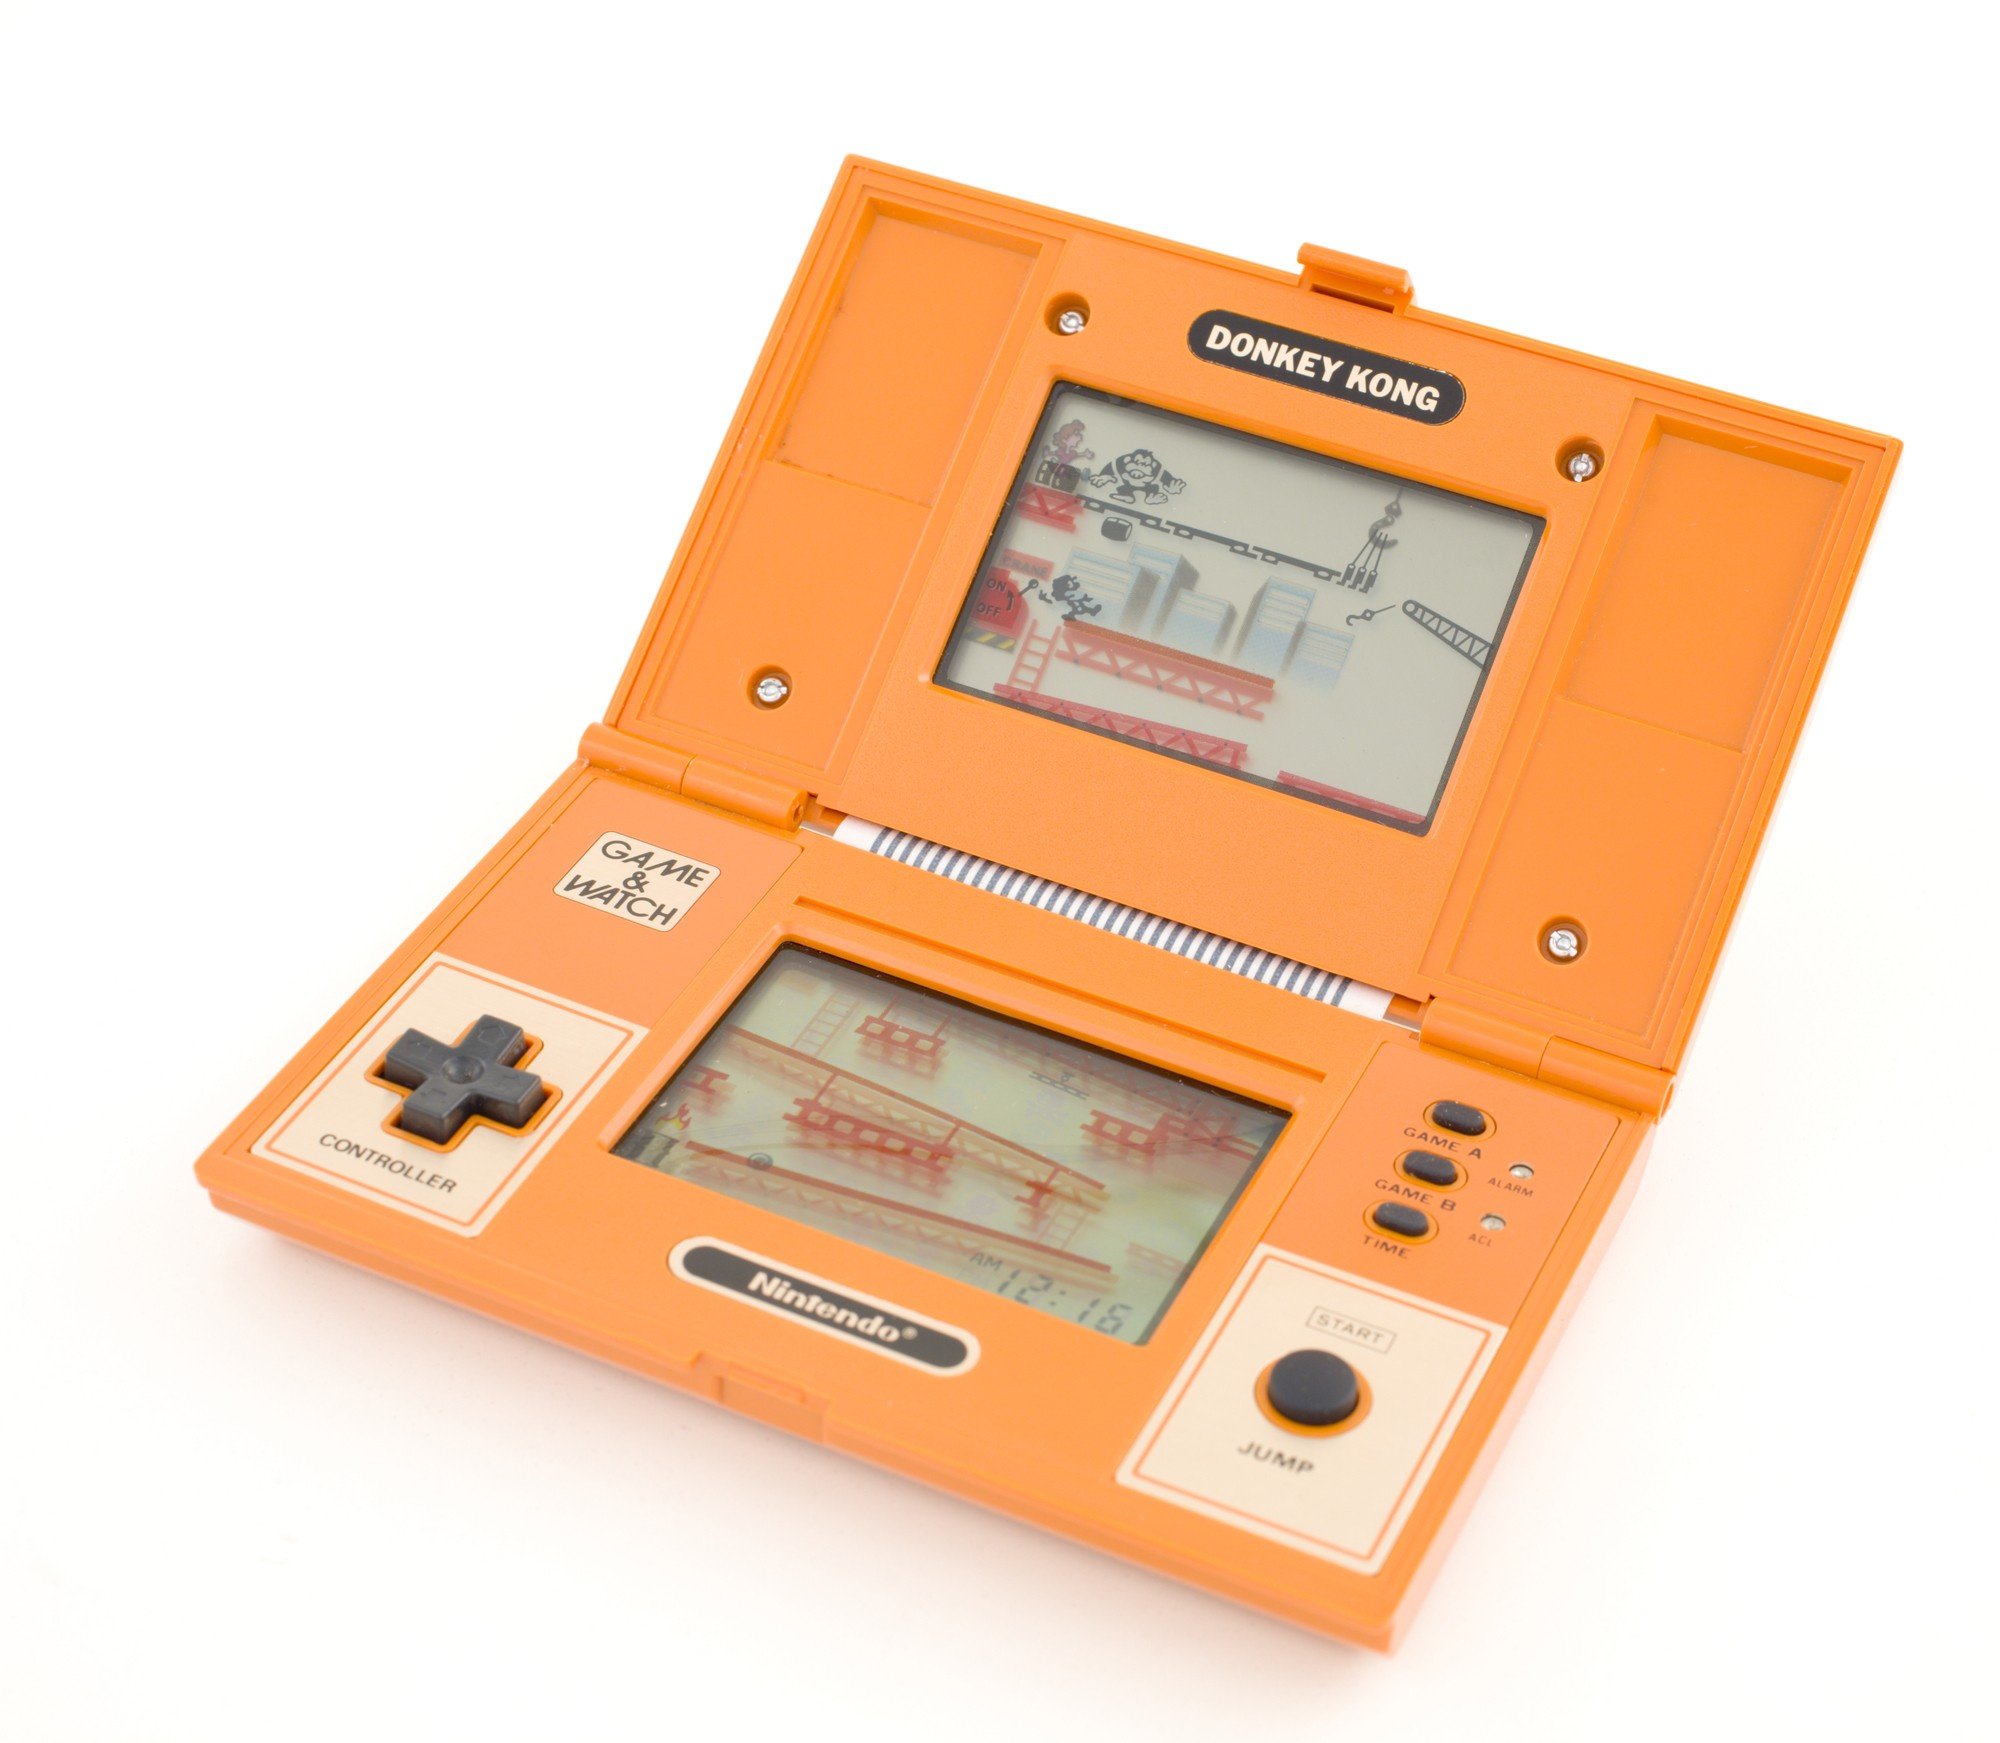 new game and watch price